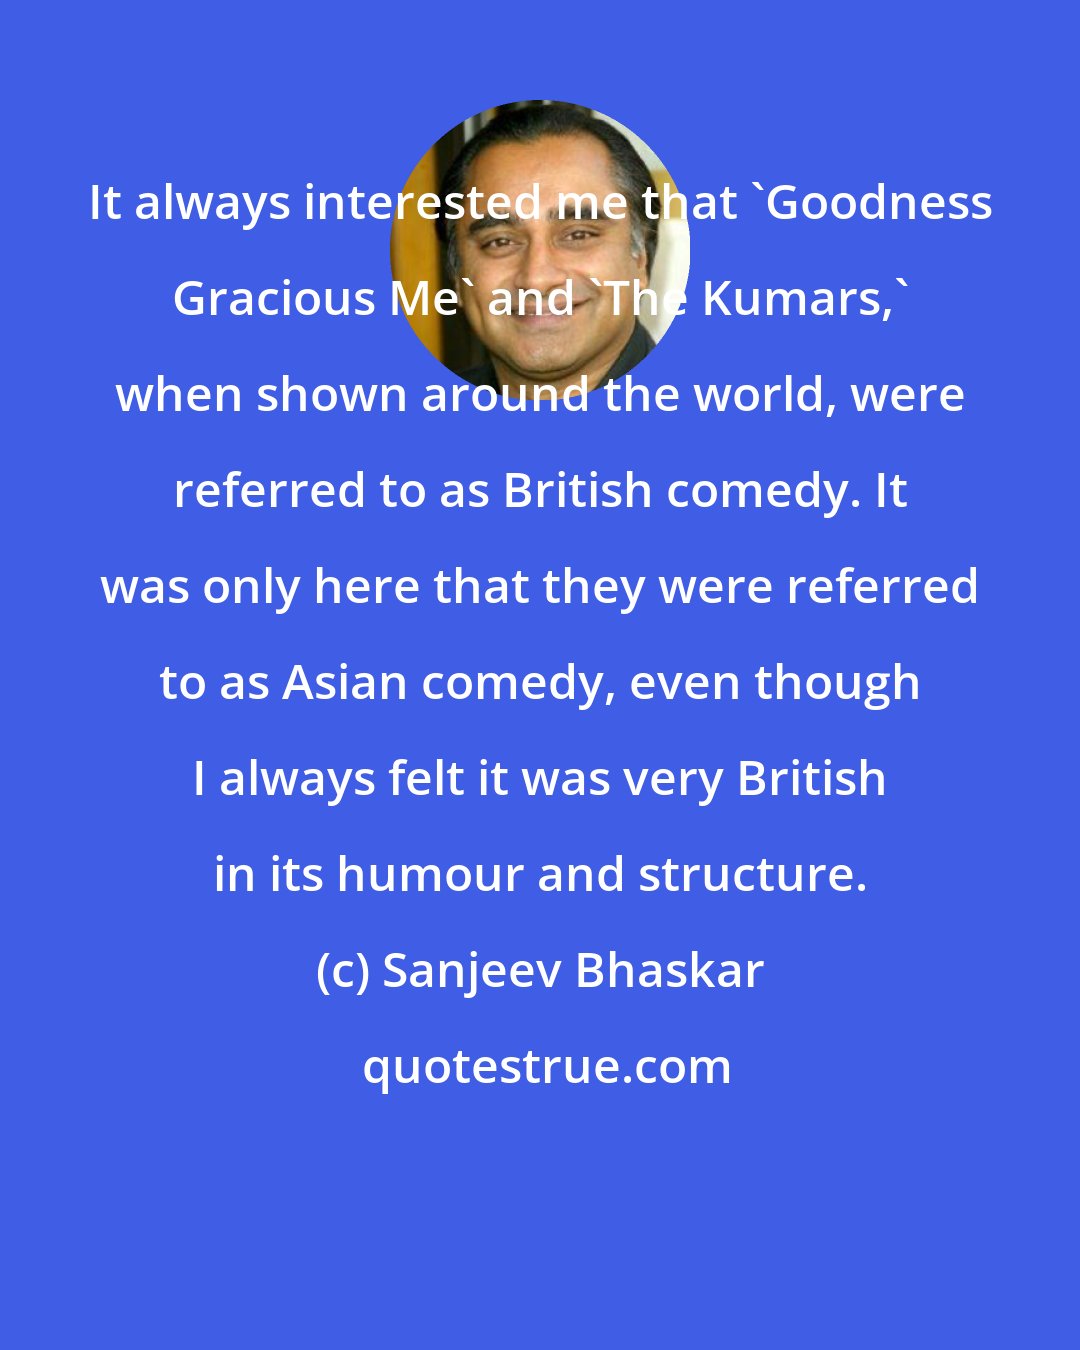 Sanjeev Bhaskar: It always interested me that 'Goodness Gracious Me' and 'The Kumars,' when shown around the world, were referred to as British comedy. It was only here that they were referred to as Asian comedy, even though I always felt it was very British in its humour and structure.